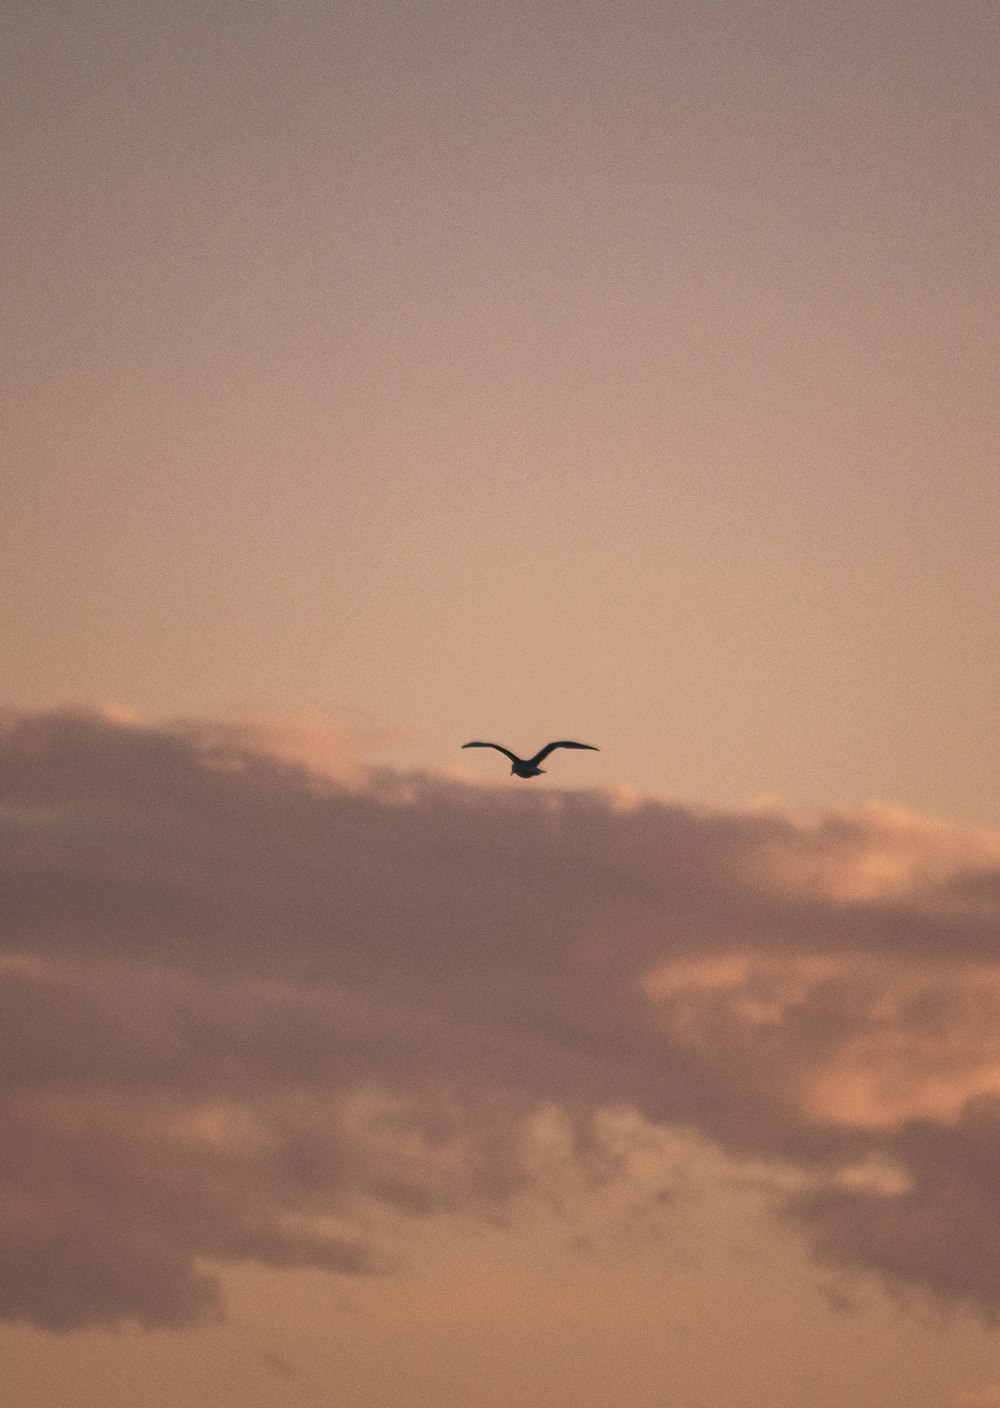 silhouette of bird flying under cloudy sky during daytime